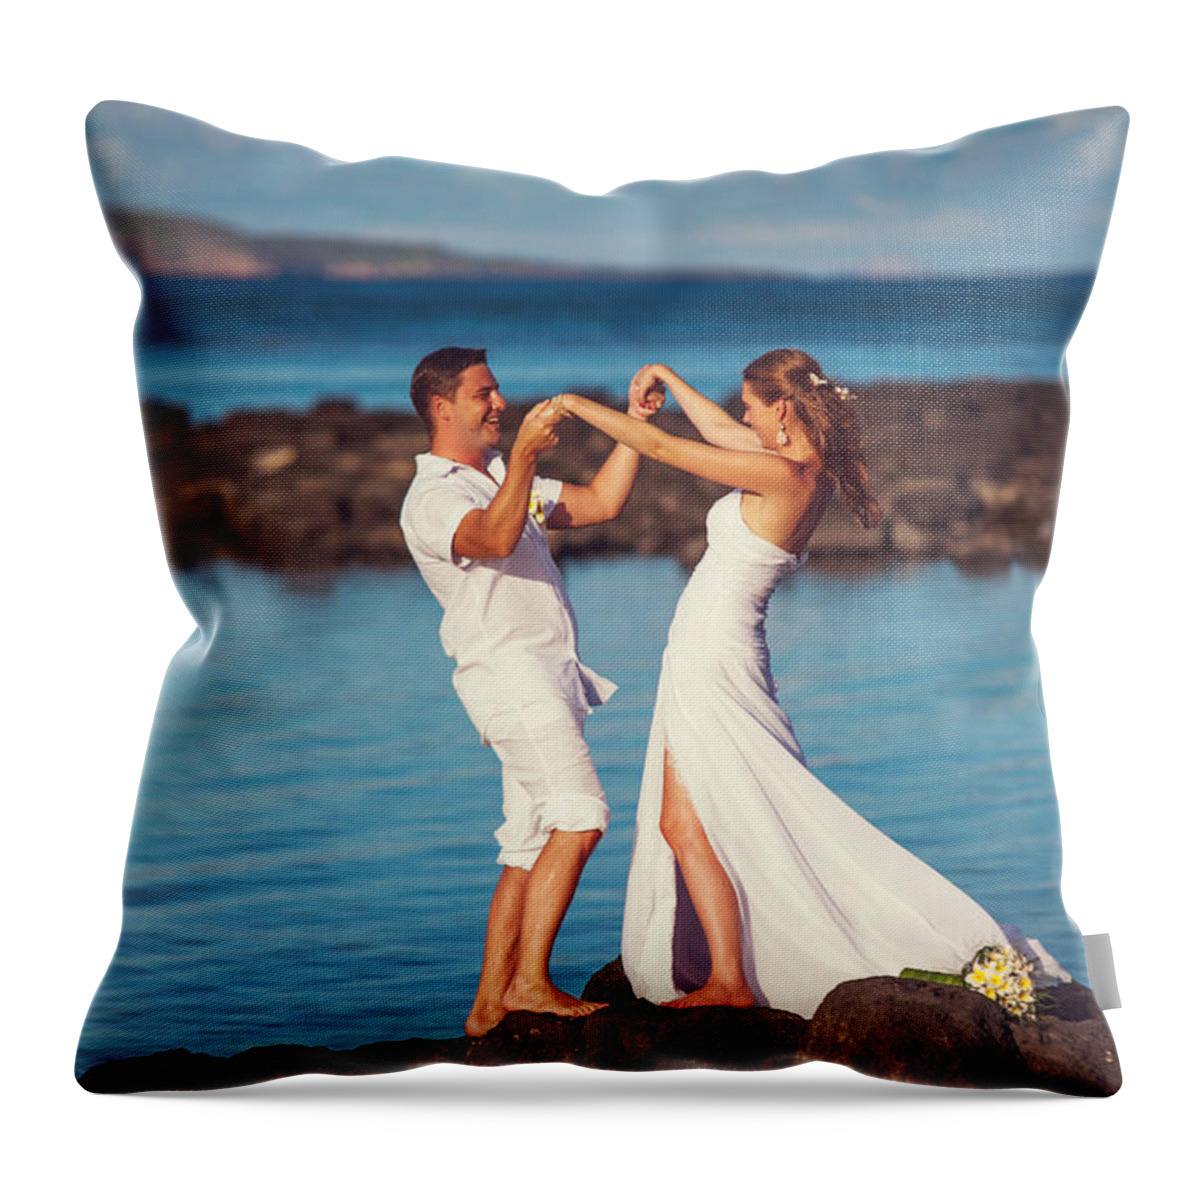 Love Throw Pillow featuring the photograph Celebrating Love by Jenny Rainbow